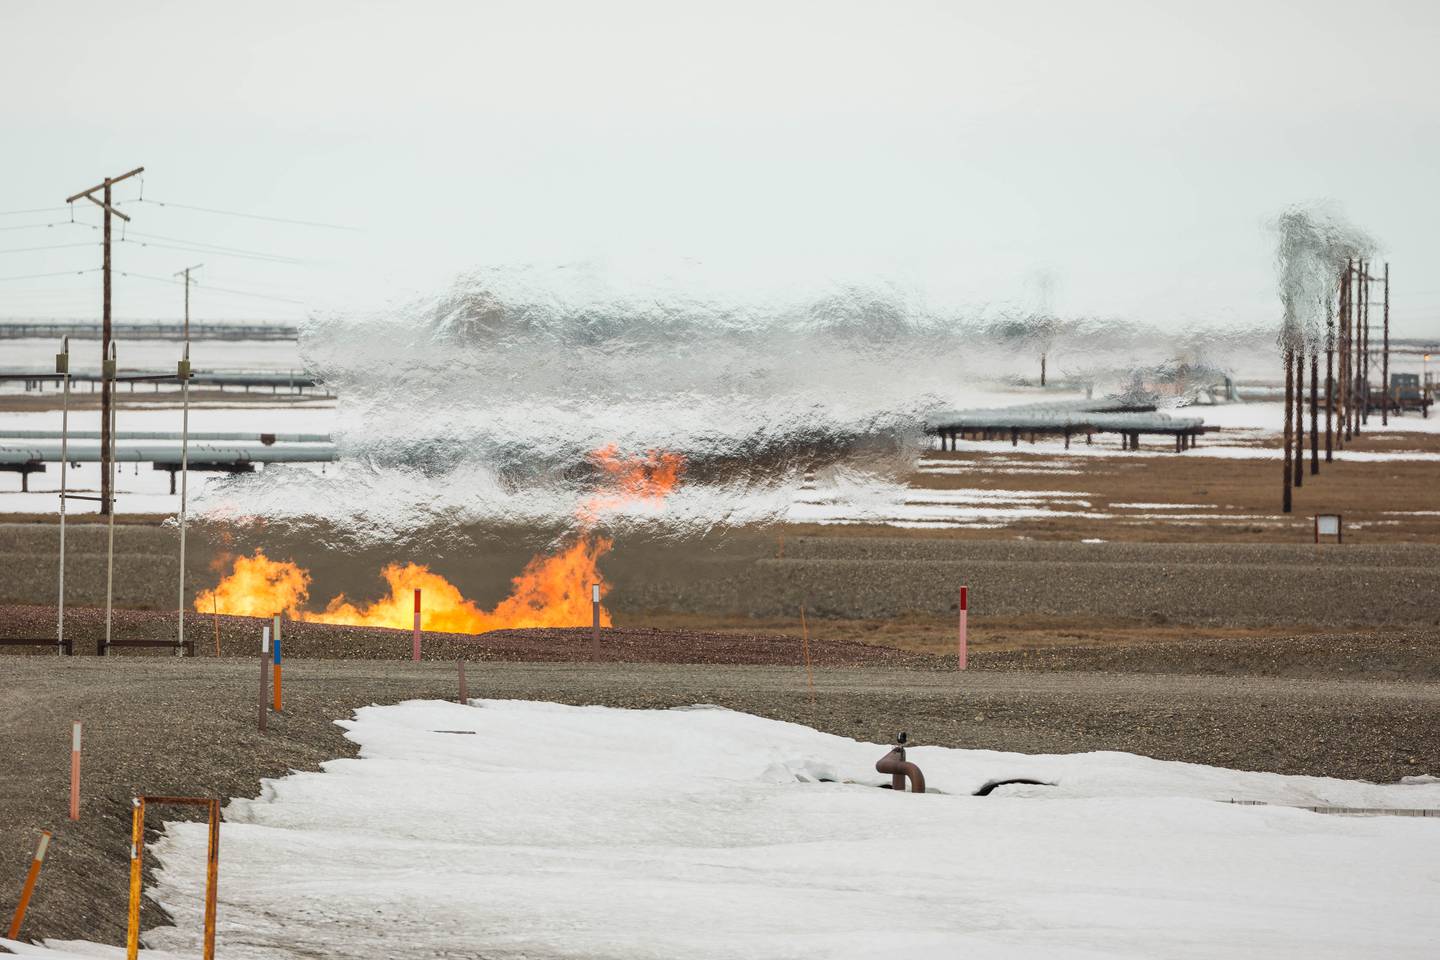 BP, BP Alaska, Deadhorse, Prudhoe, Prudhoe Bay, Burn, Burning, Fire, Flare, Gas, Gas Flare, Natural Gas, North Slope, Oil, Oil & Gas, Oil And Gas, Oil Development